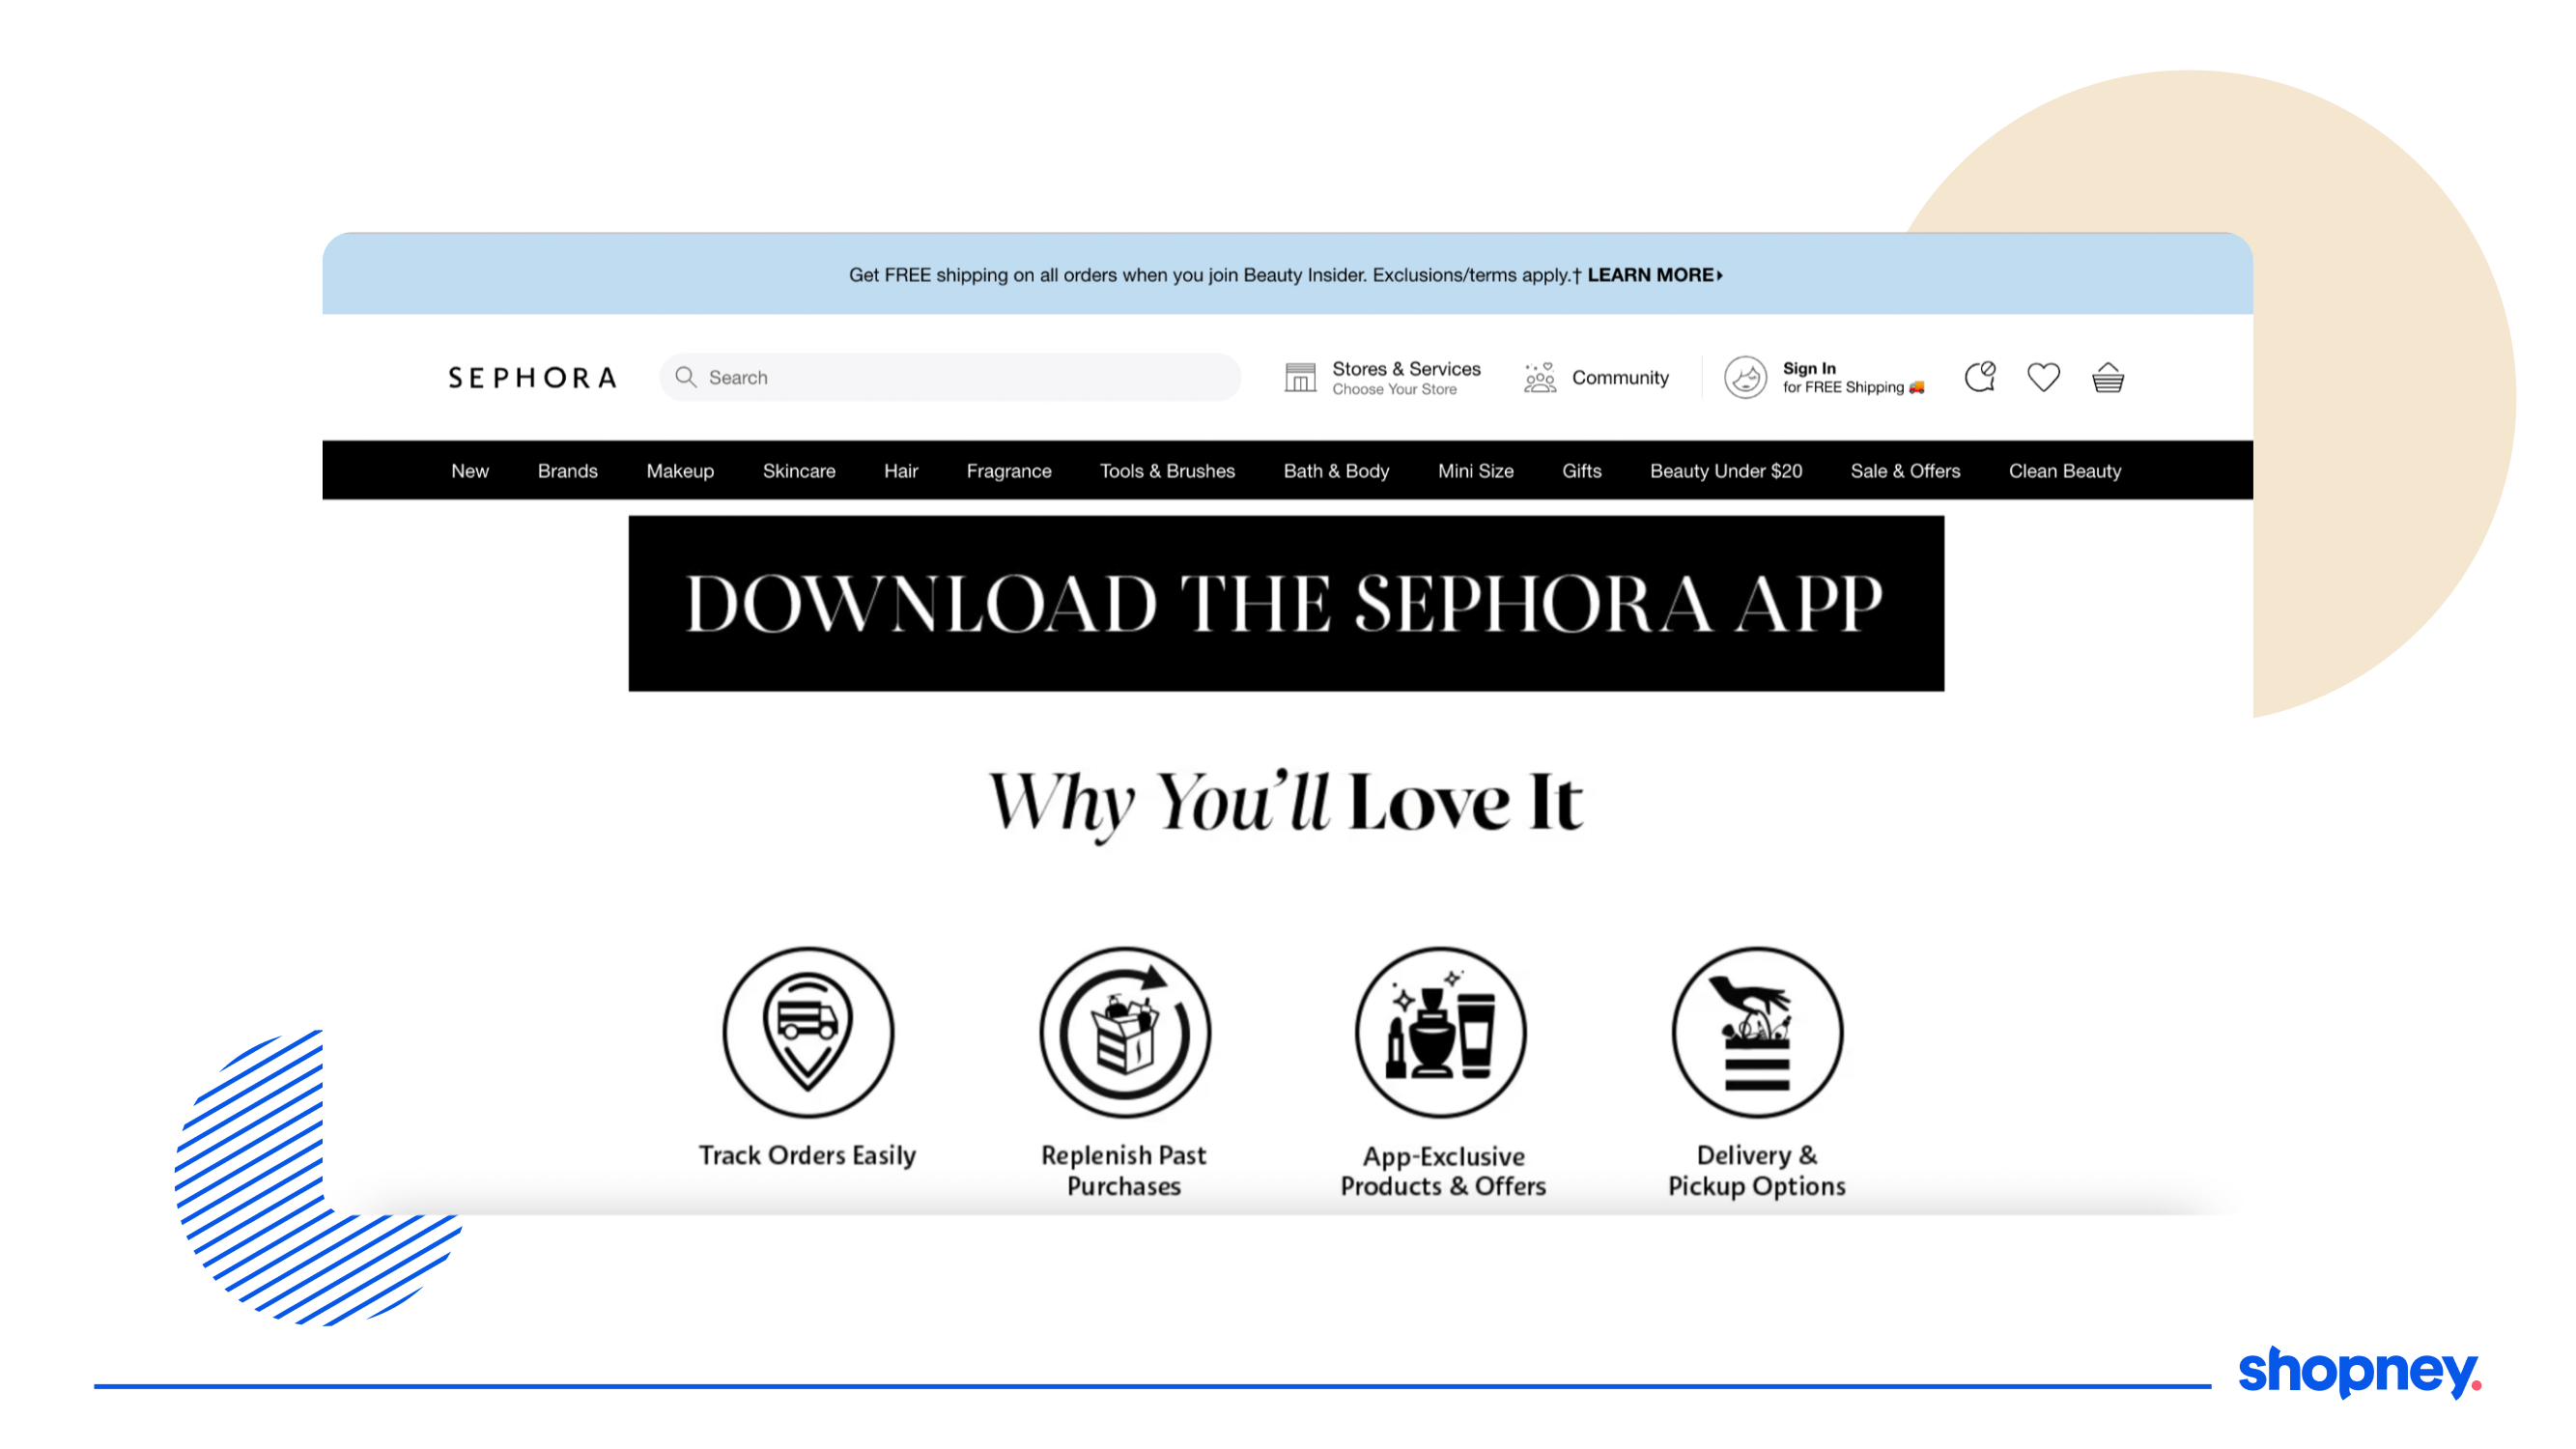 Landing page of Sephora to promote its app